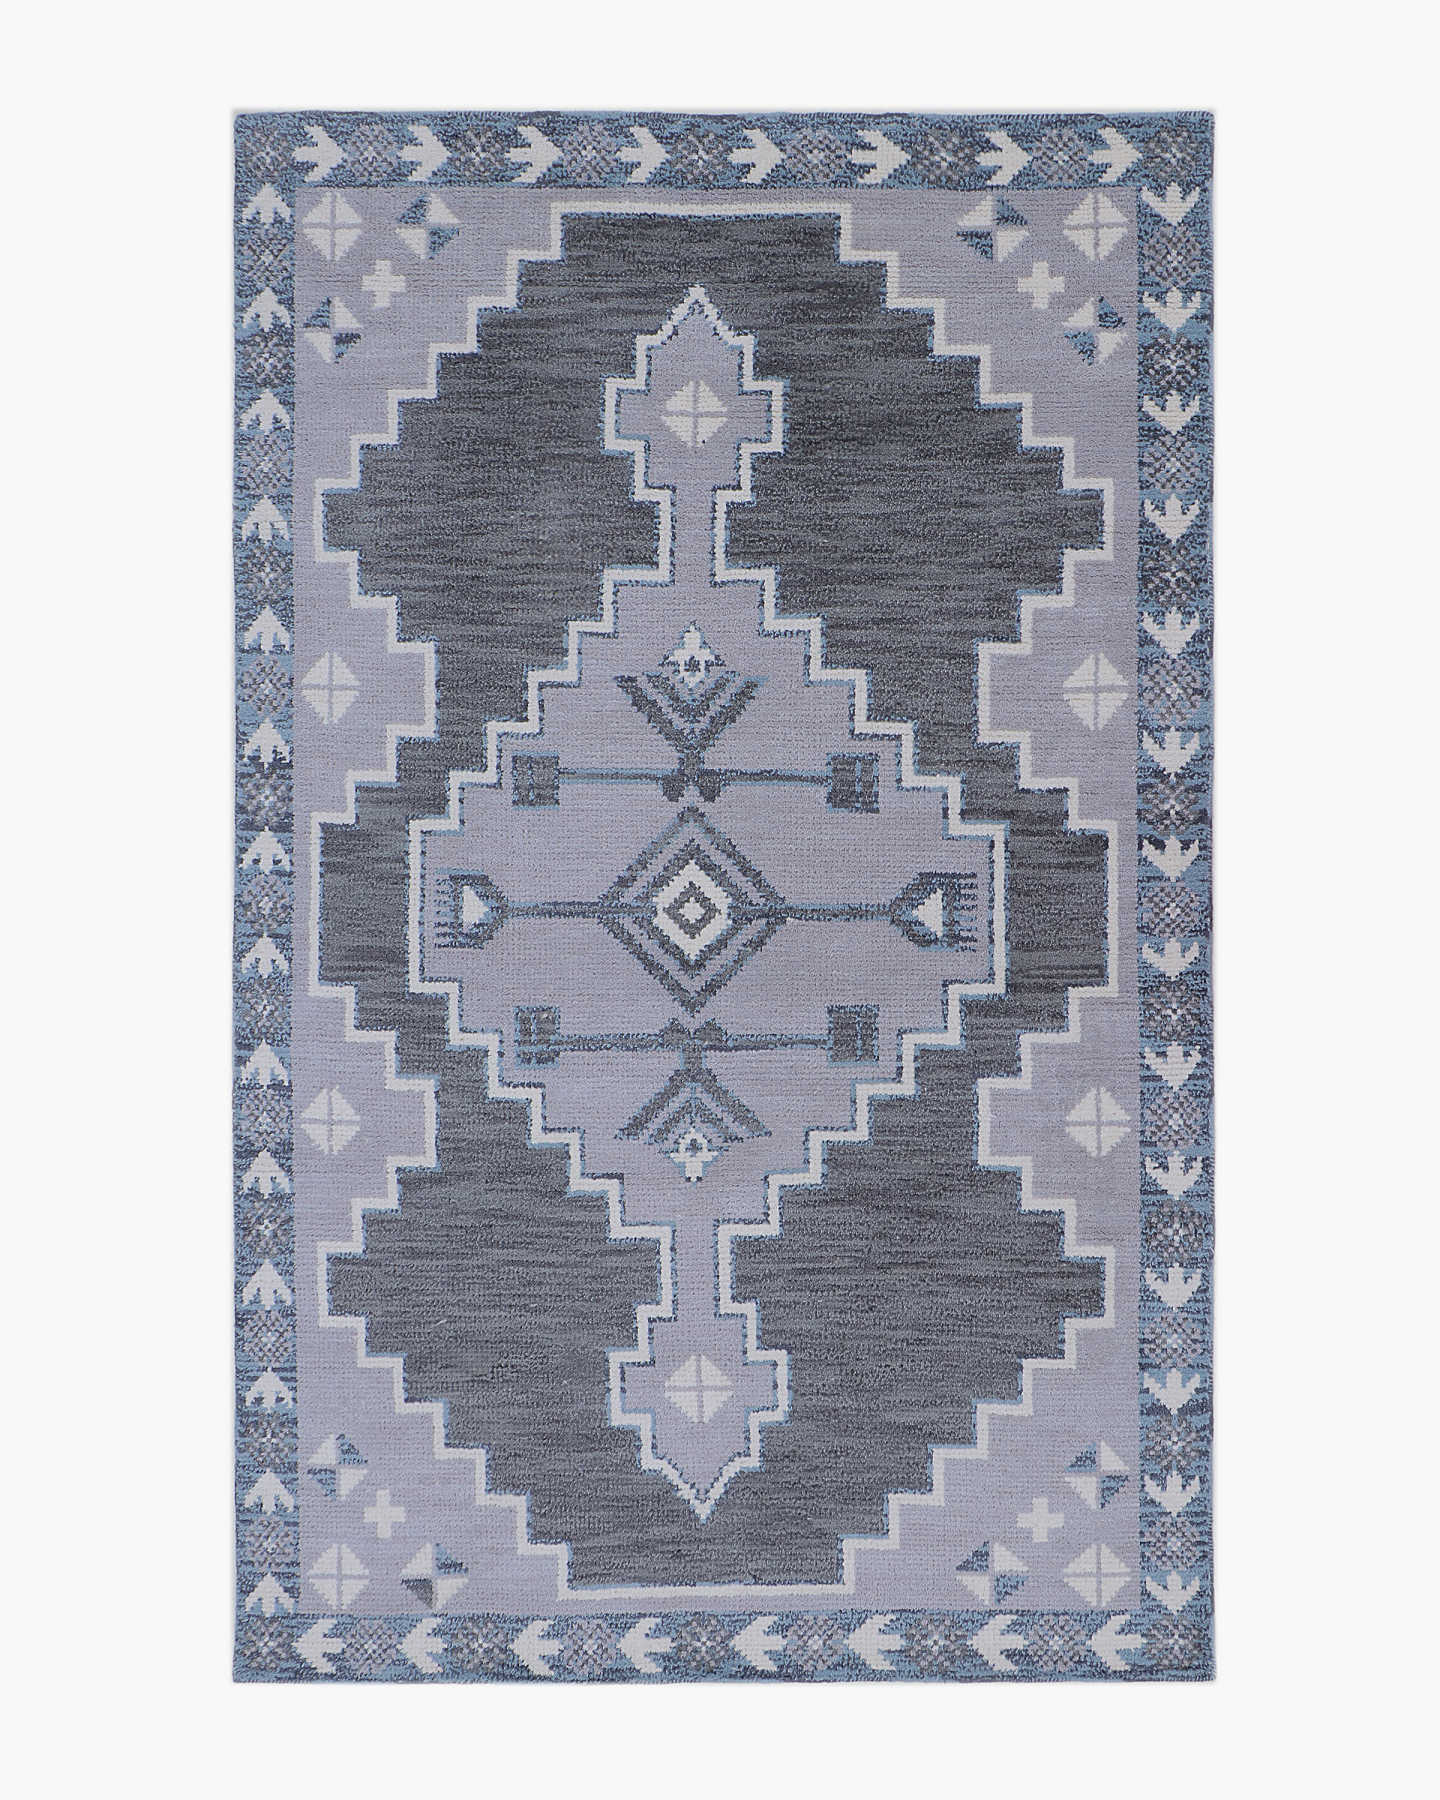 You May Also Like - Suri Hand-Knotted Wool Rug - Grey/Blue